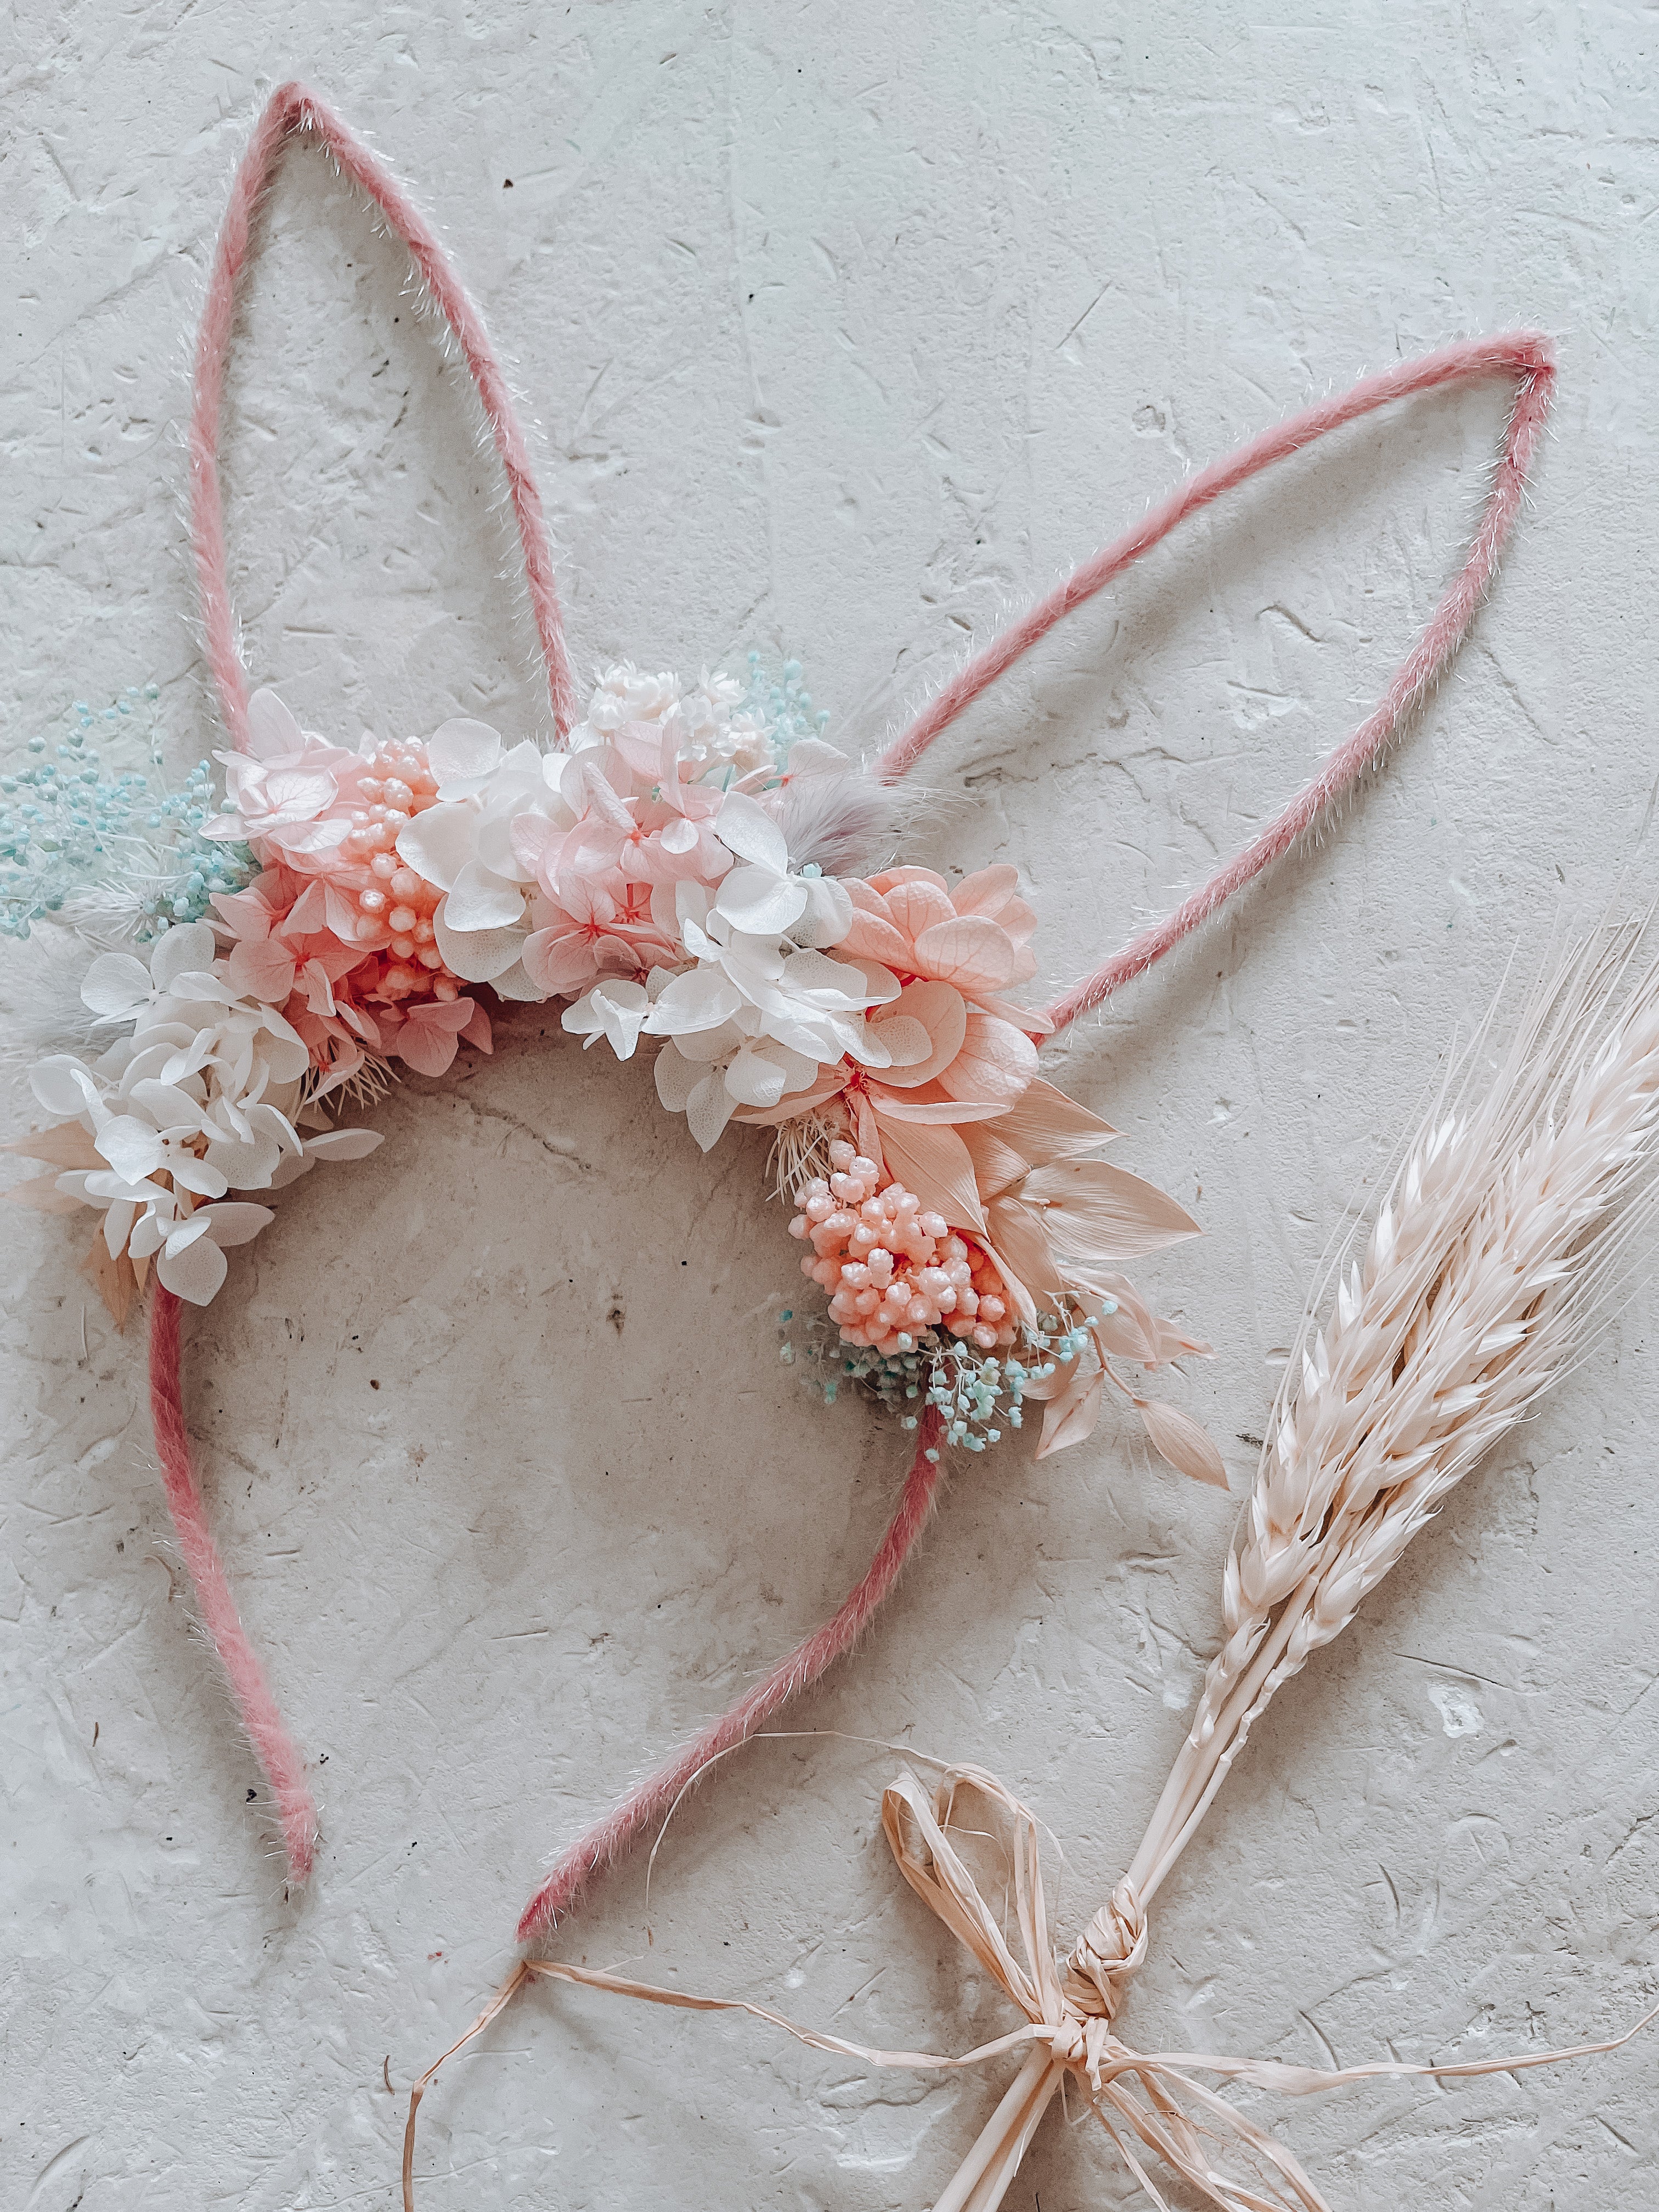 Everlasting bunny crown - PINK wire ears